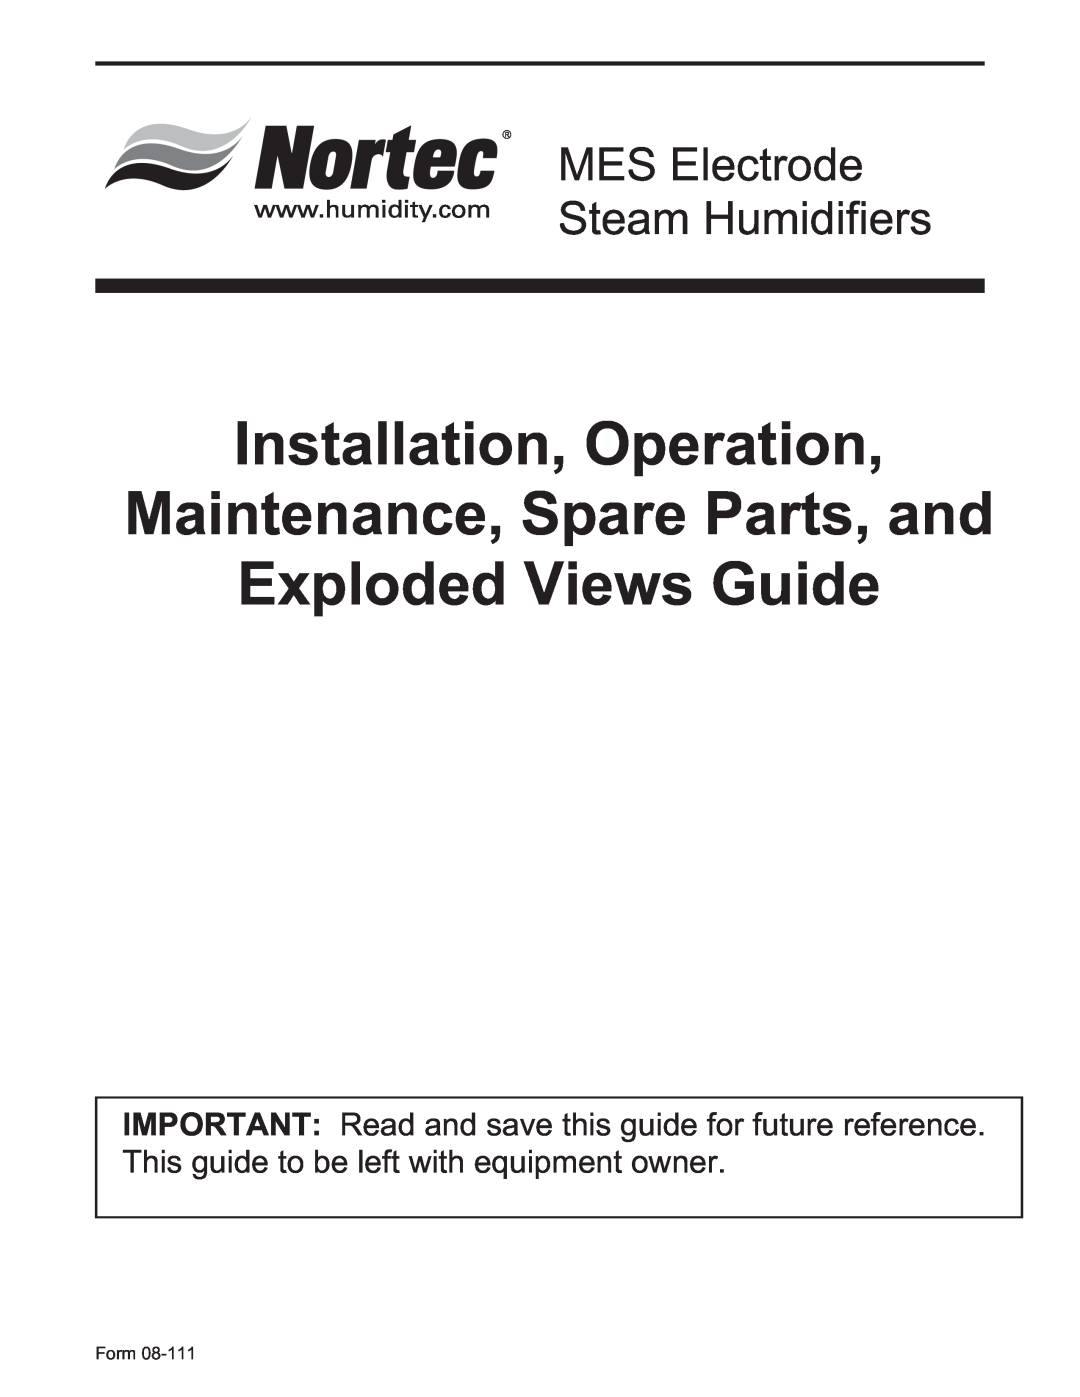 Nortec Industries None manual Installation, Operation, Maintenance, Spare Parts, and, Exploded Views Guide 